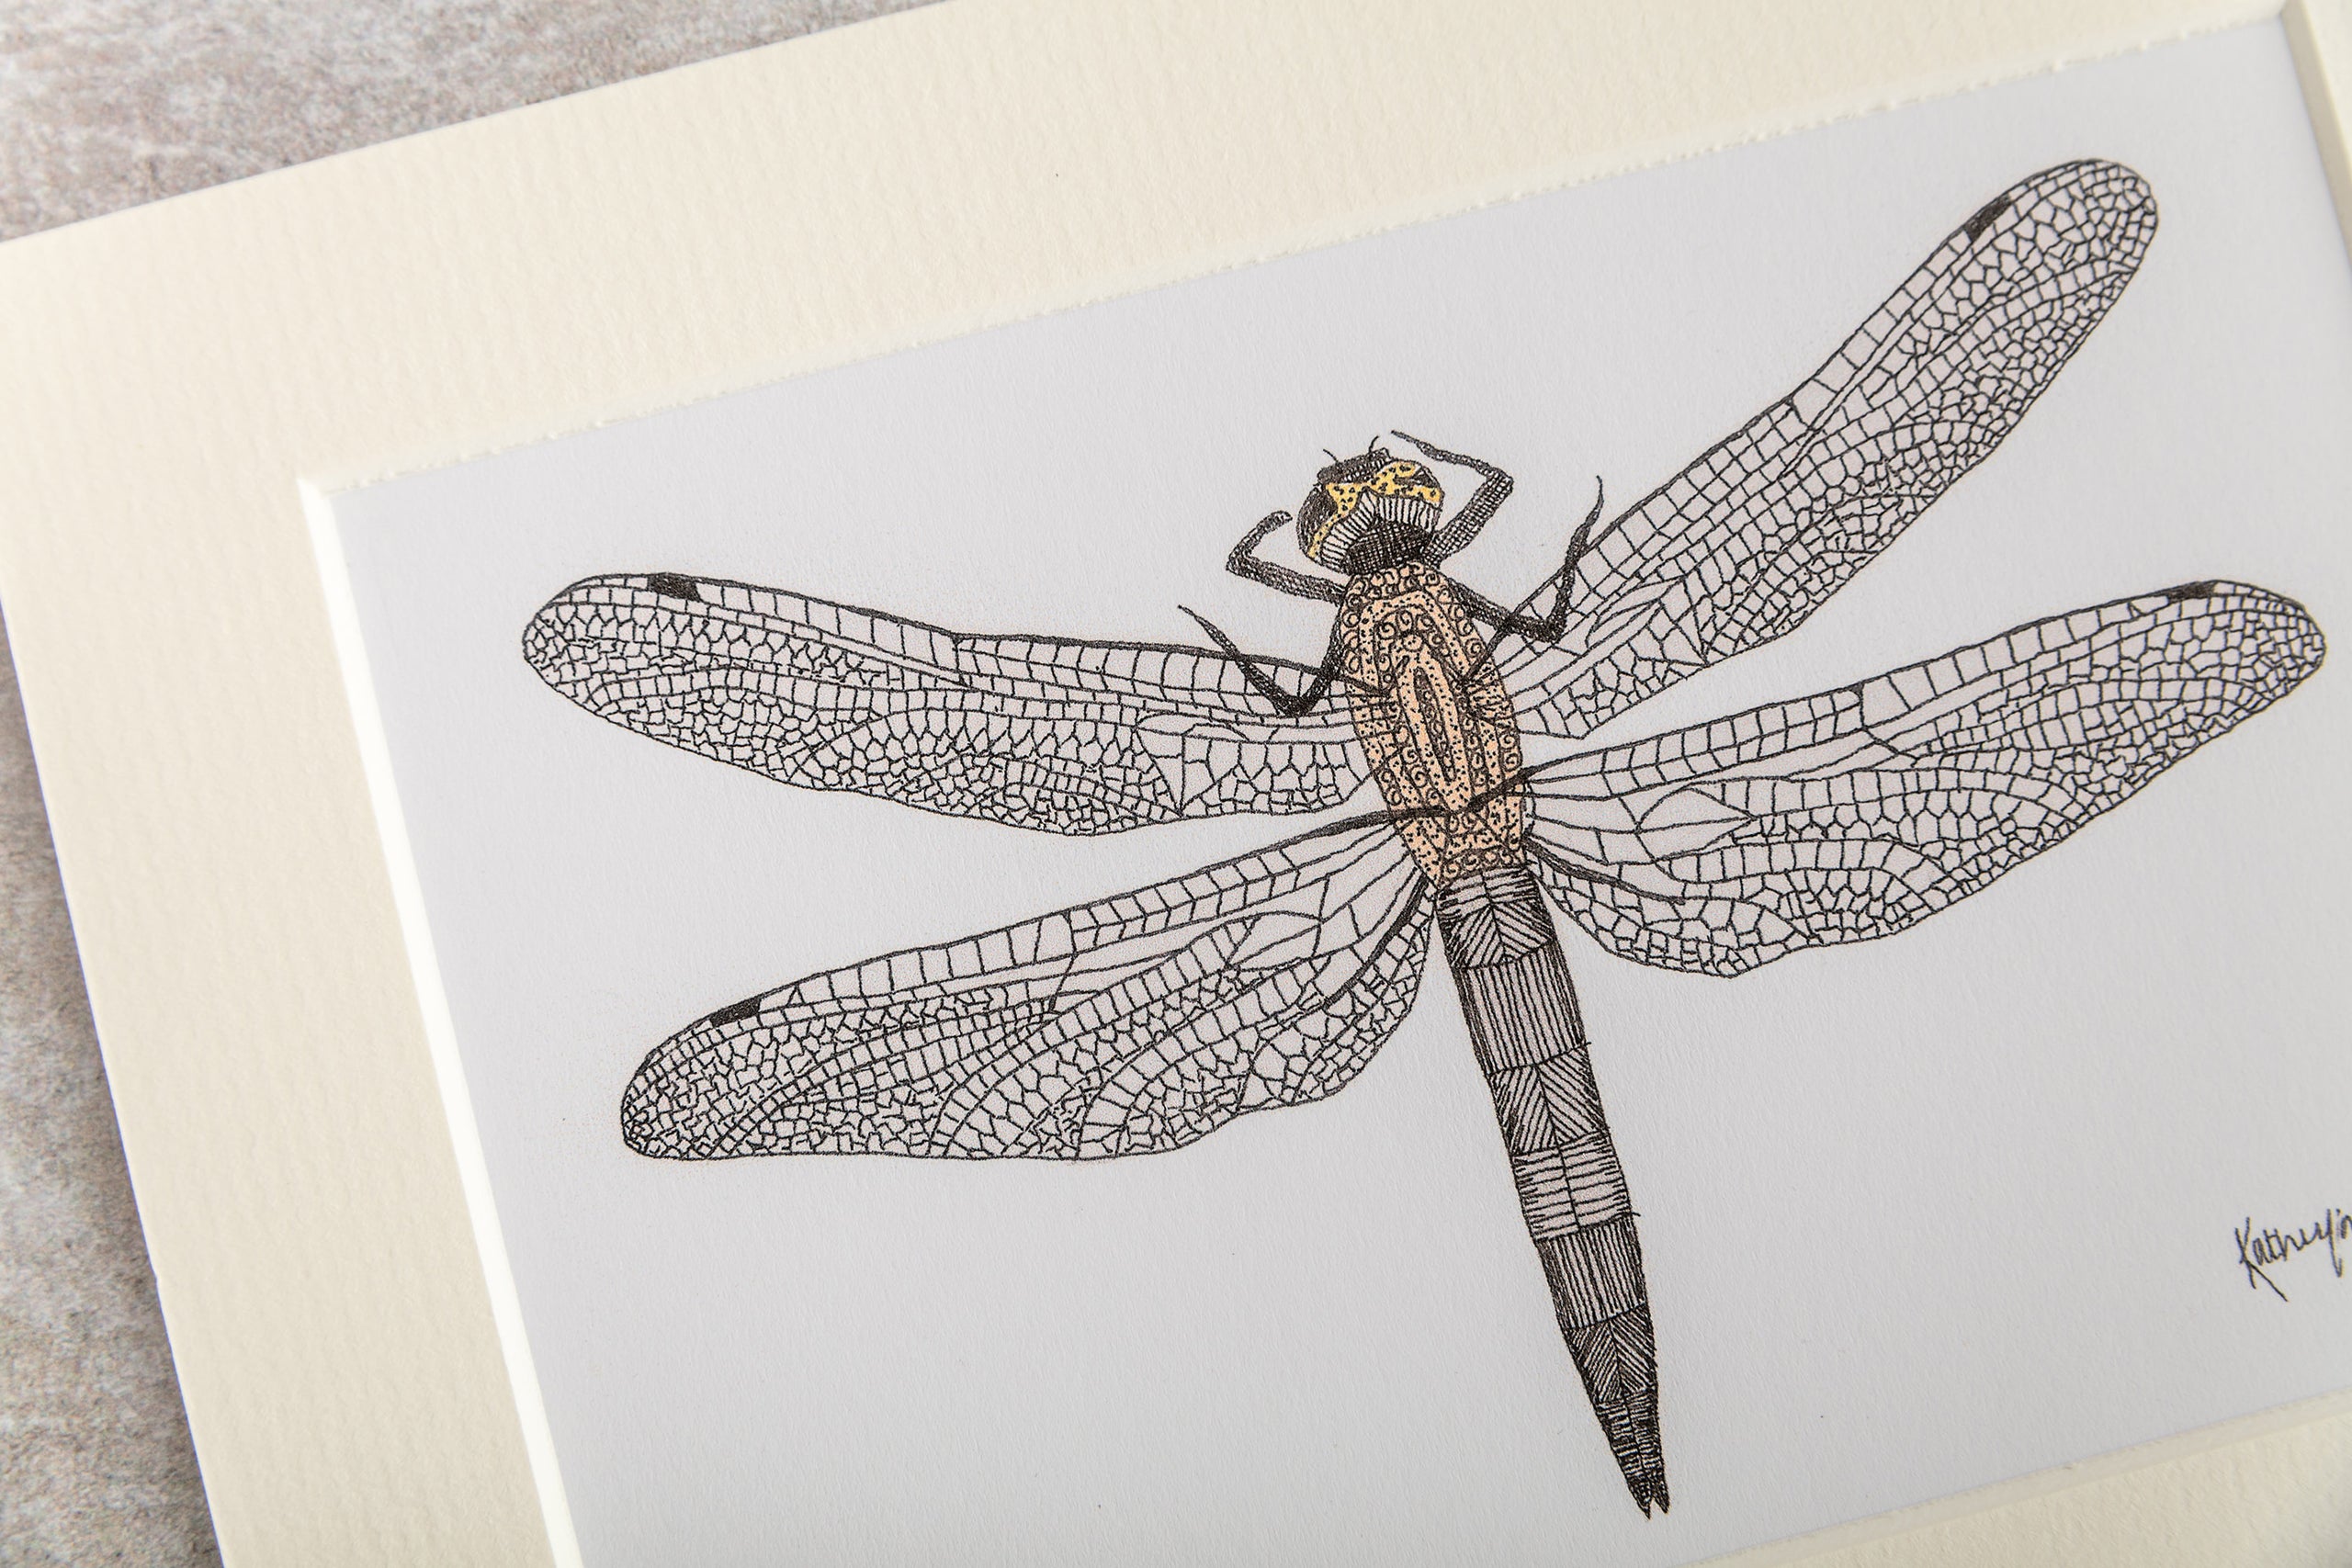 Drawing a Dragonfly - Stippling with Pen and Ink